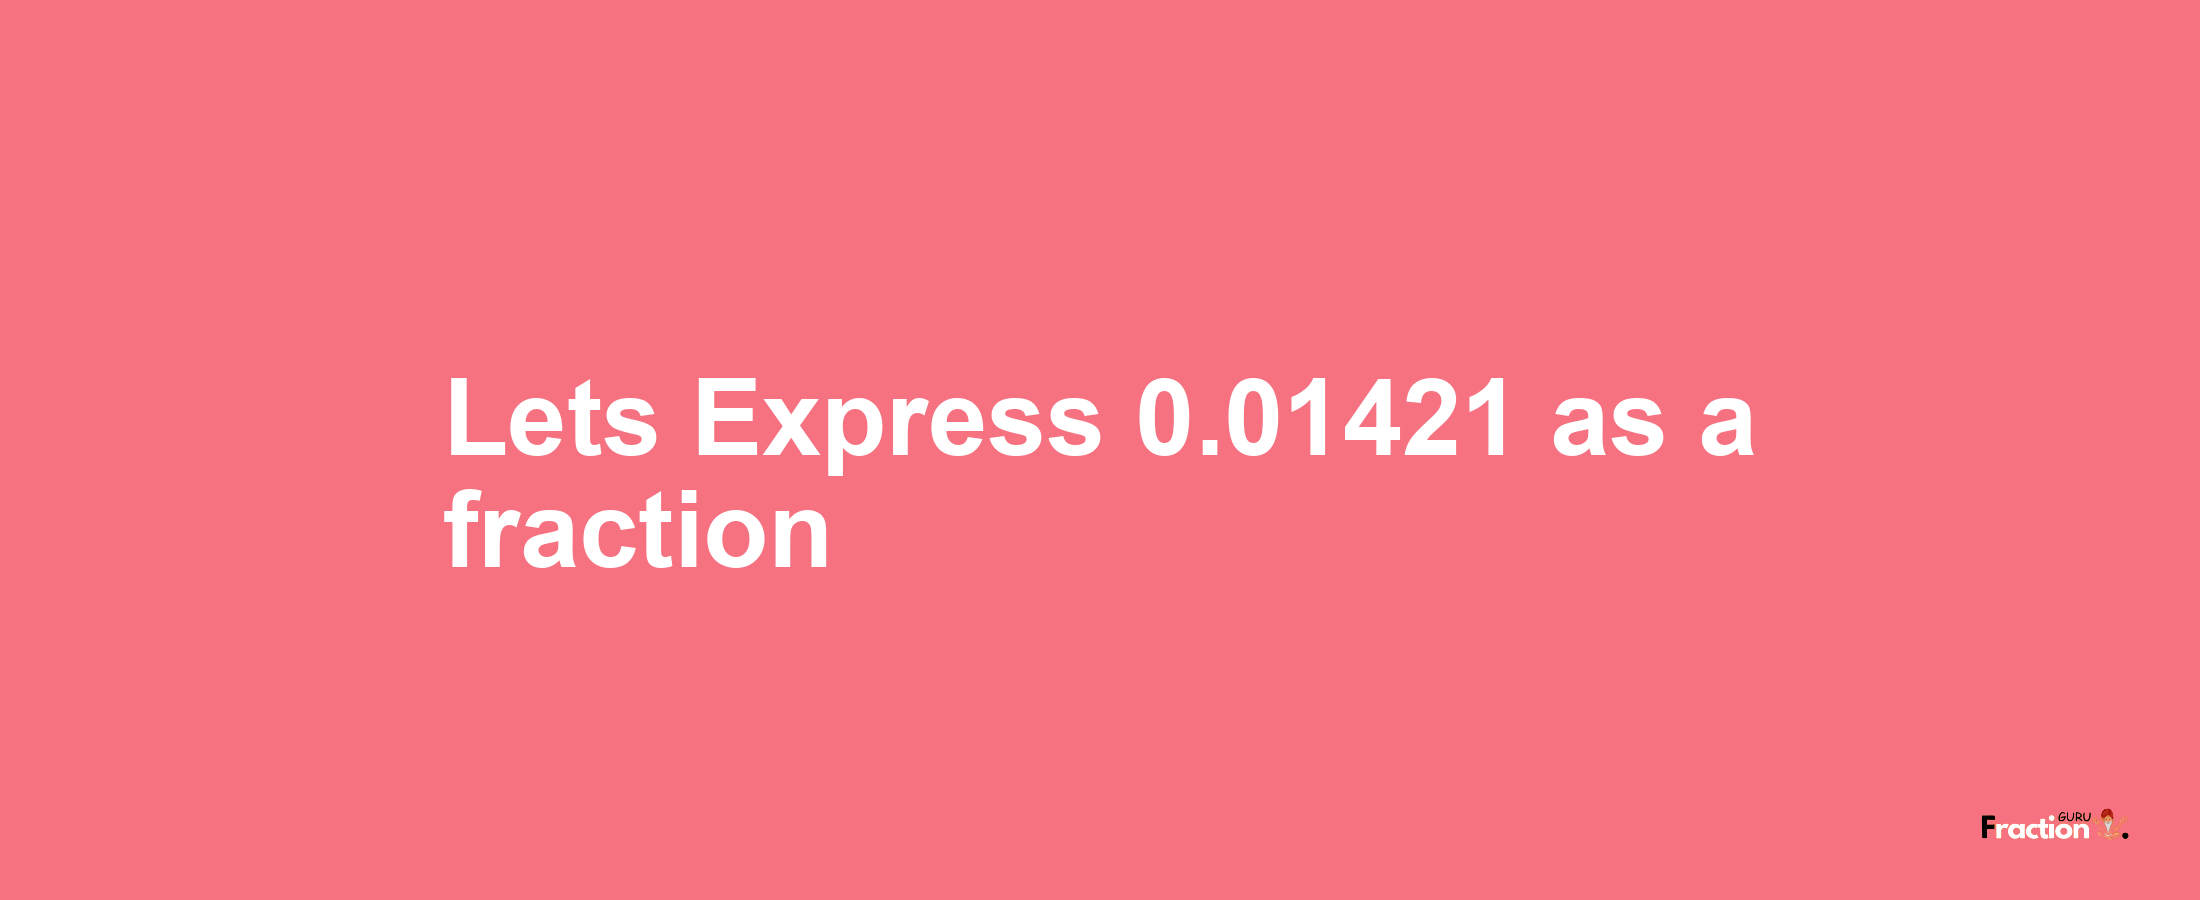 Lets Express 0.01421 as afraction